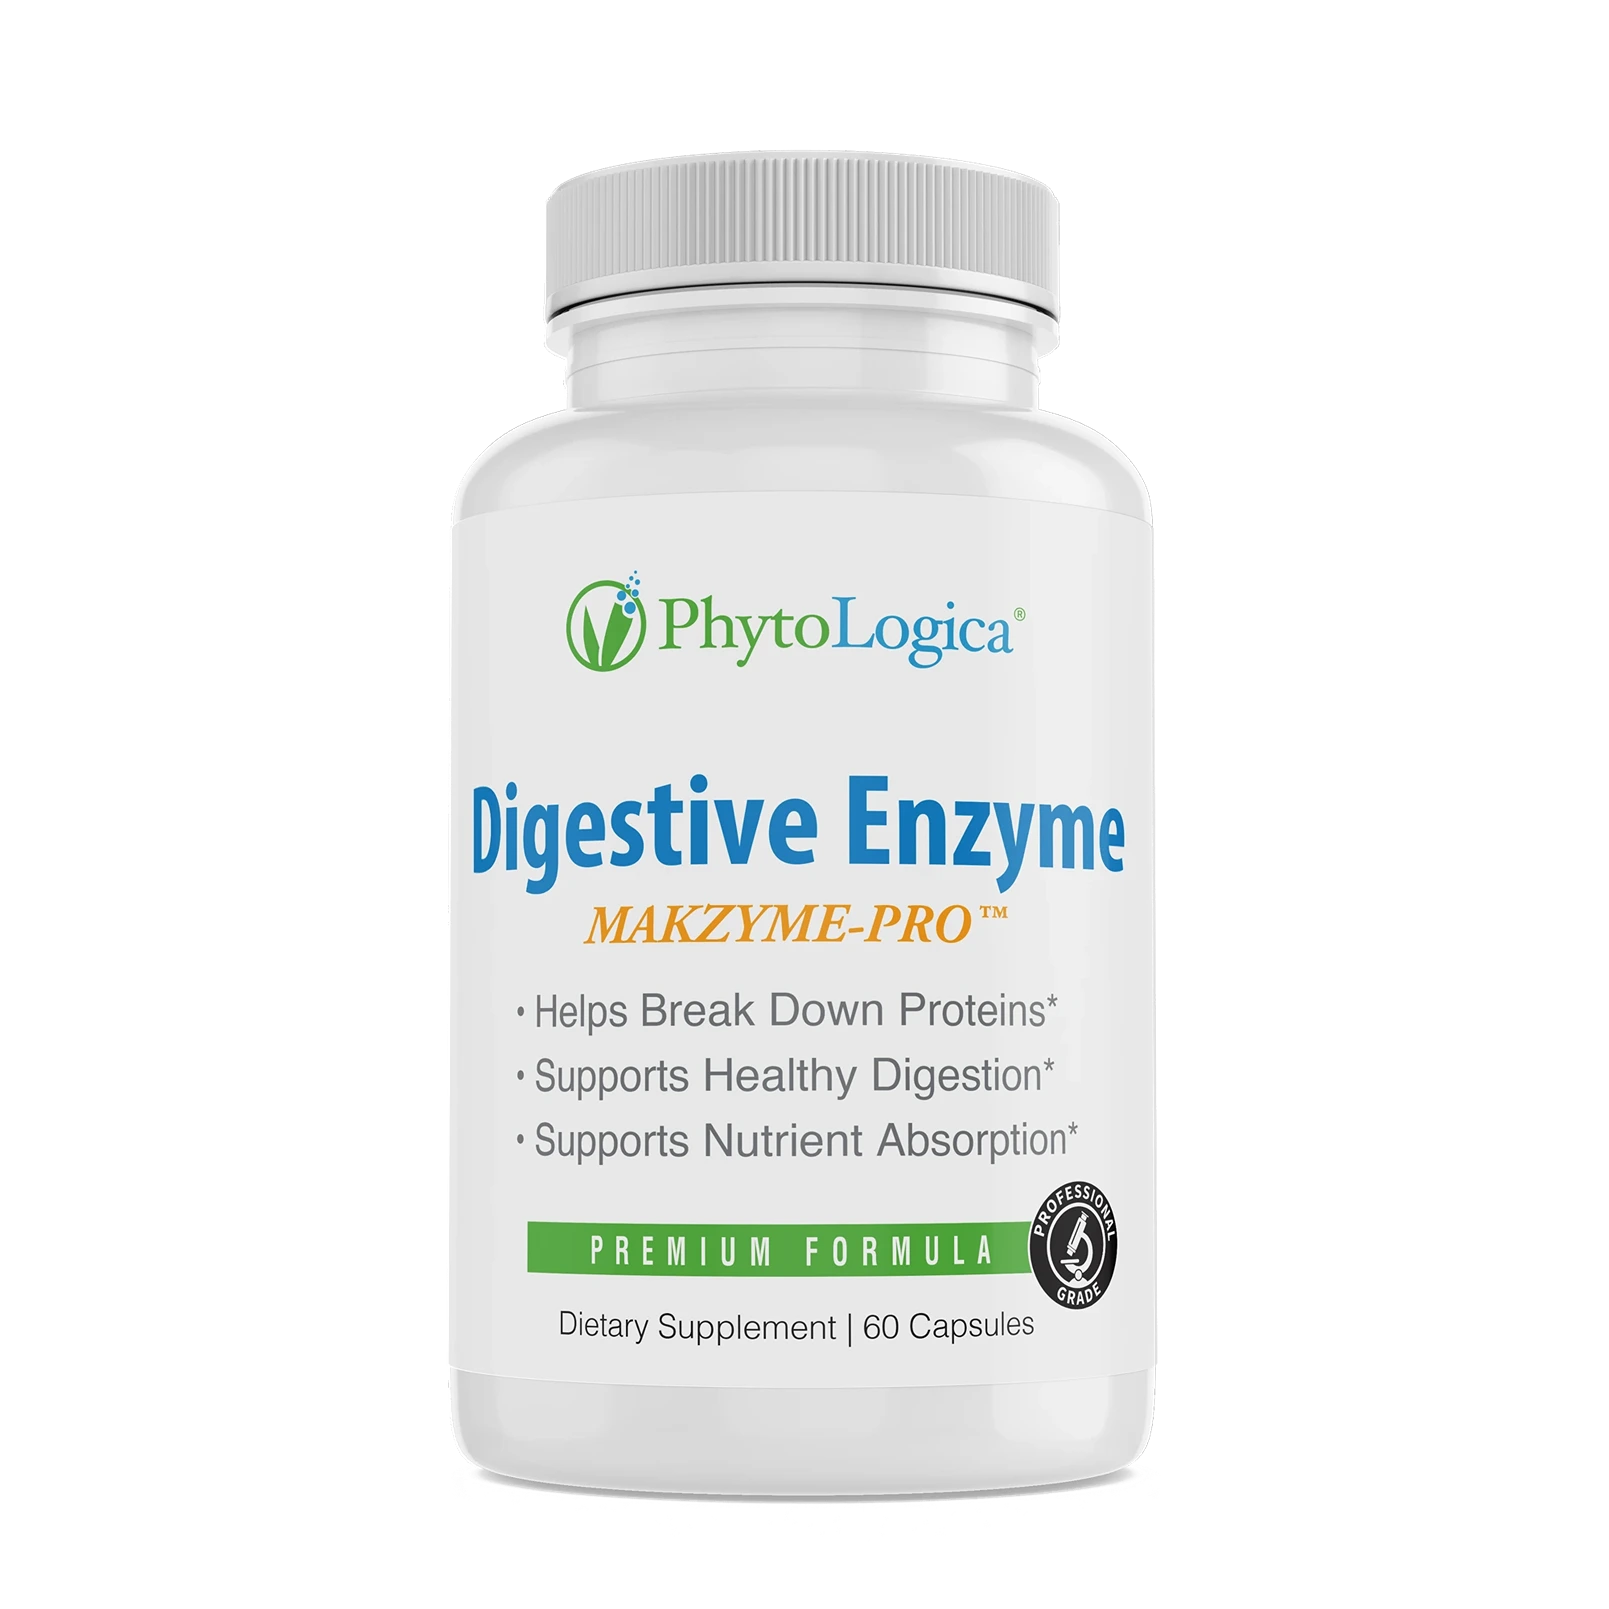 Phytologica Digestive Enzyme and Makzyme Pro Pills Bottle